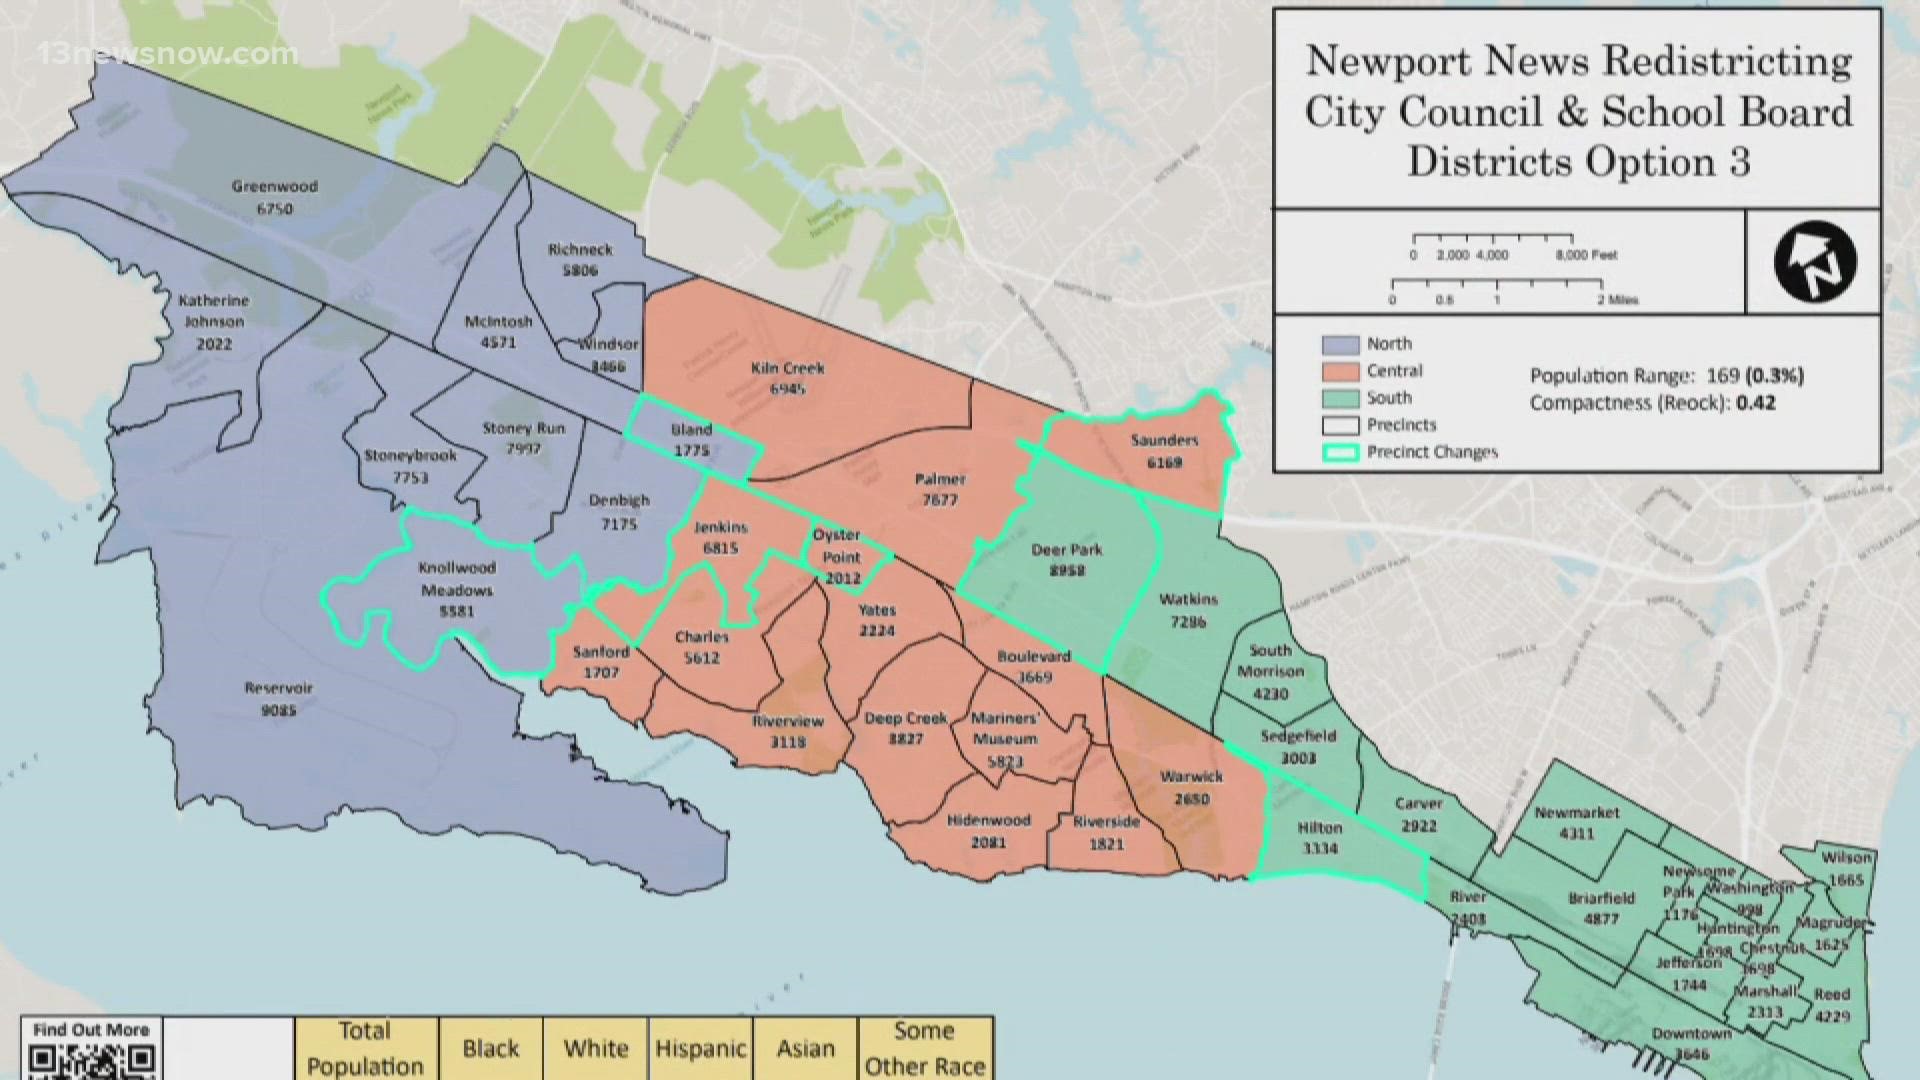 Newport News city leaders to vote on redistricting plan